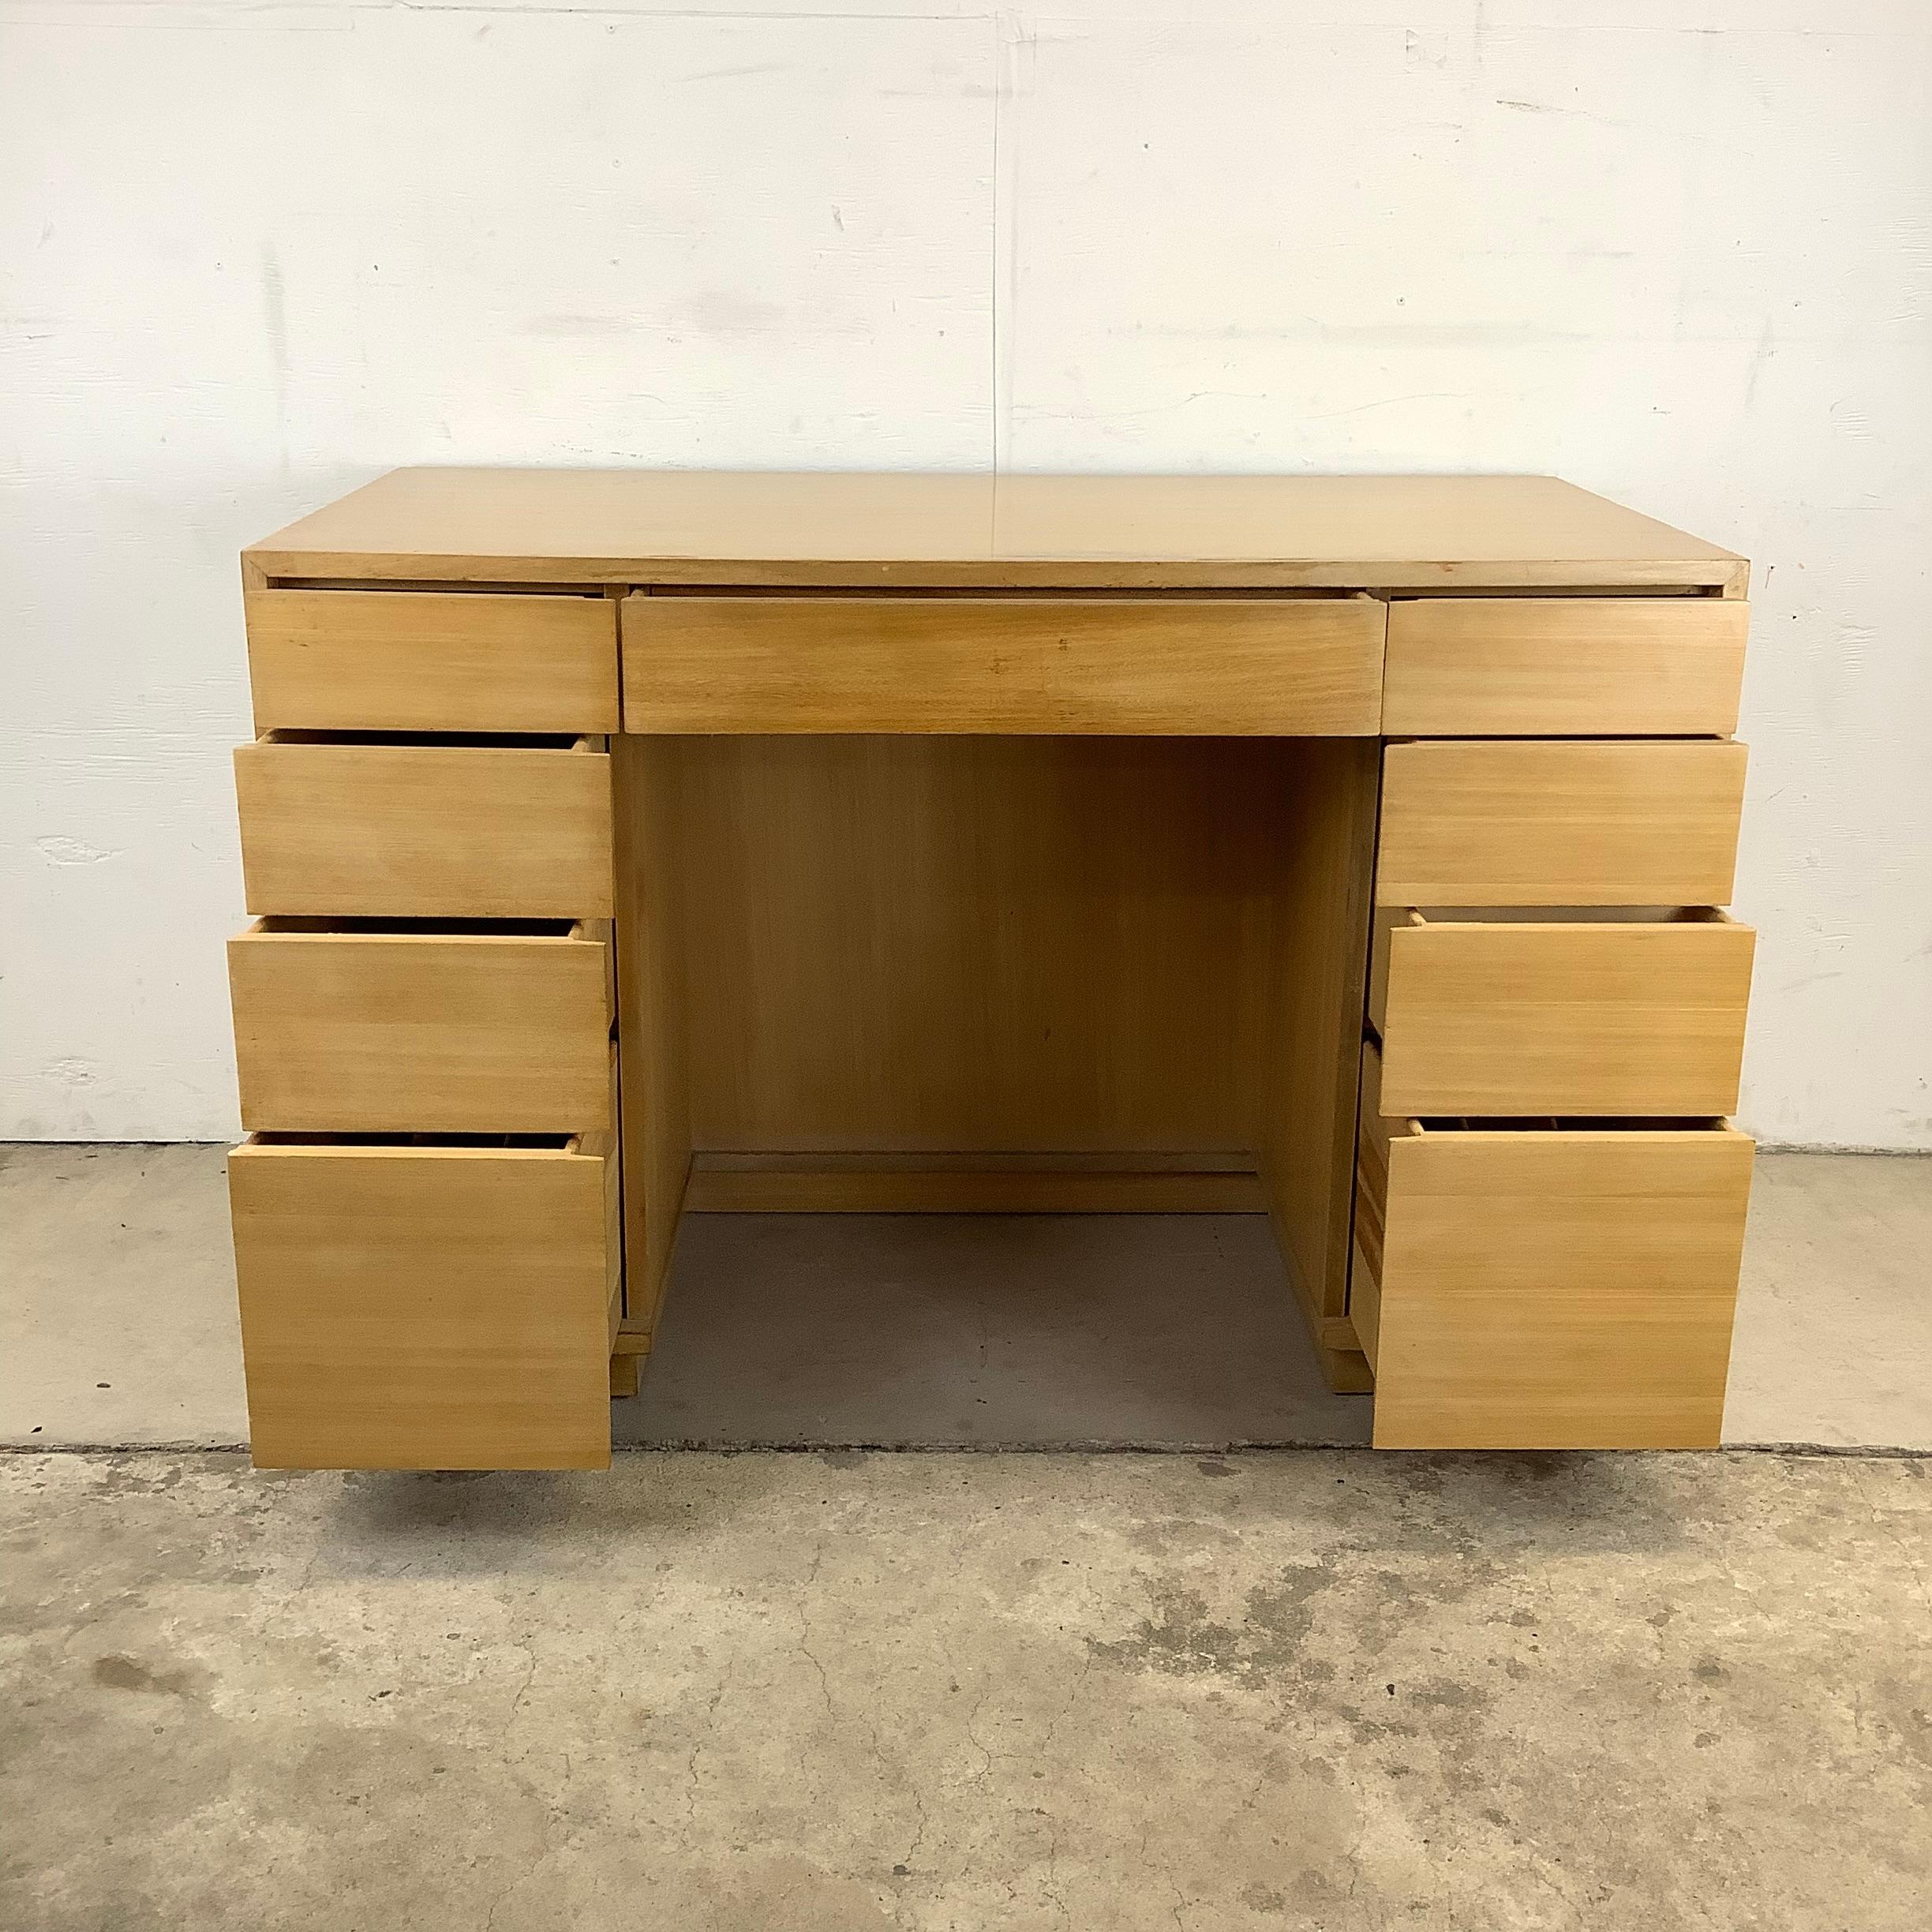 This striking double-sided desk from the Drexel Precedent line by Edward Wormley includes a spacious array of nine drawers with plenty of storage options for any office. While the clean modern lines and vintage blonde tone wood finish makes this a